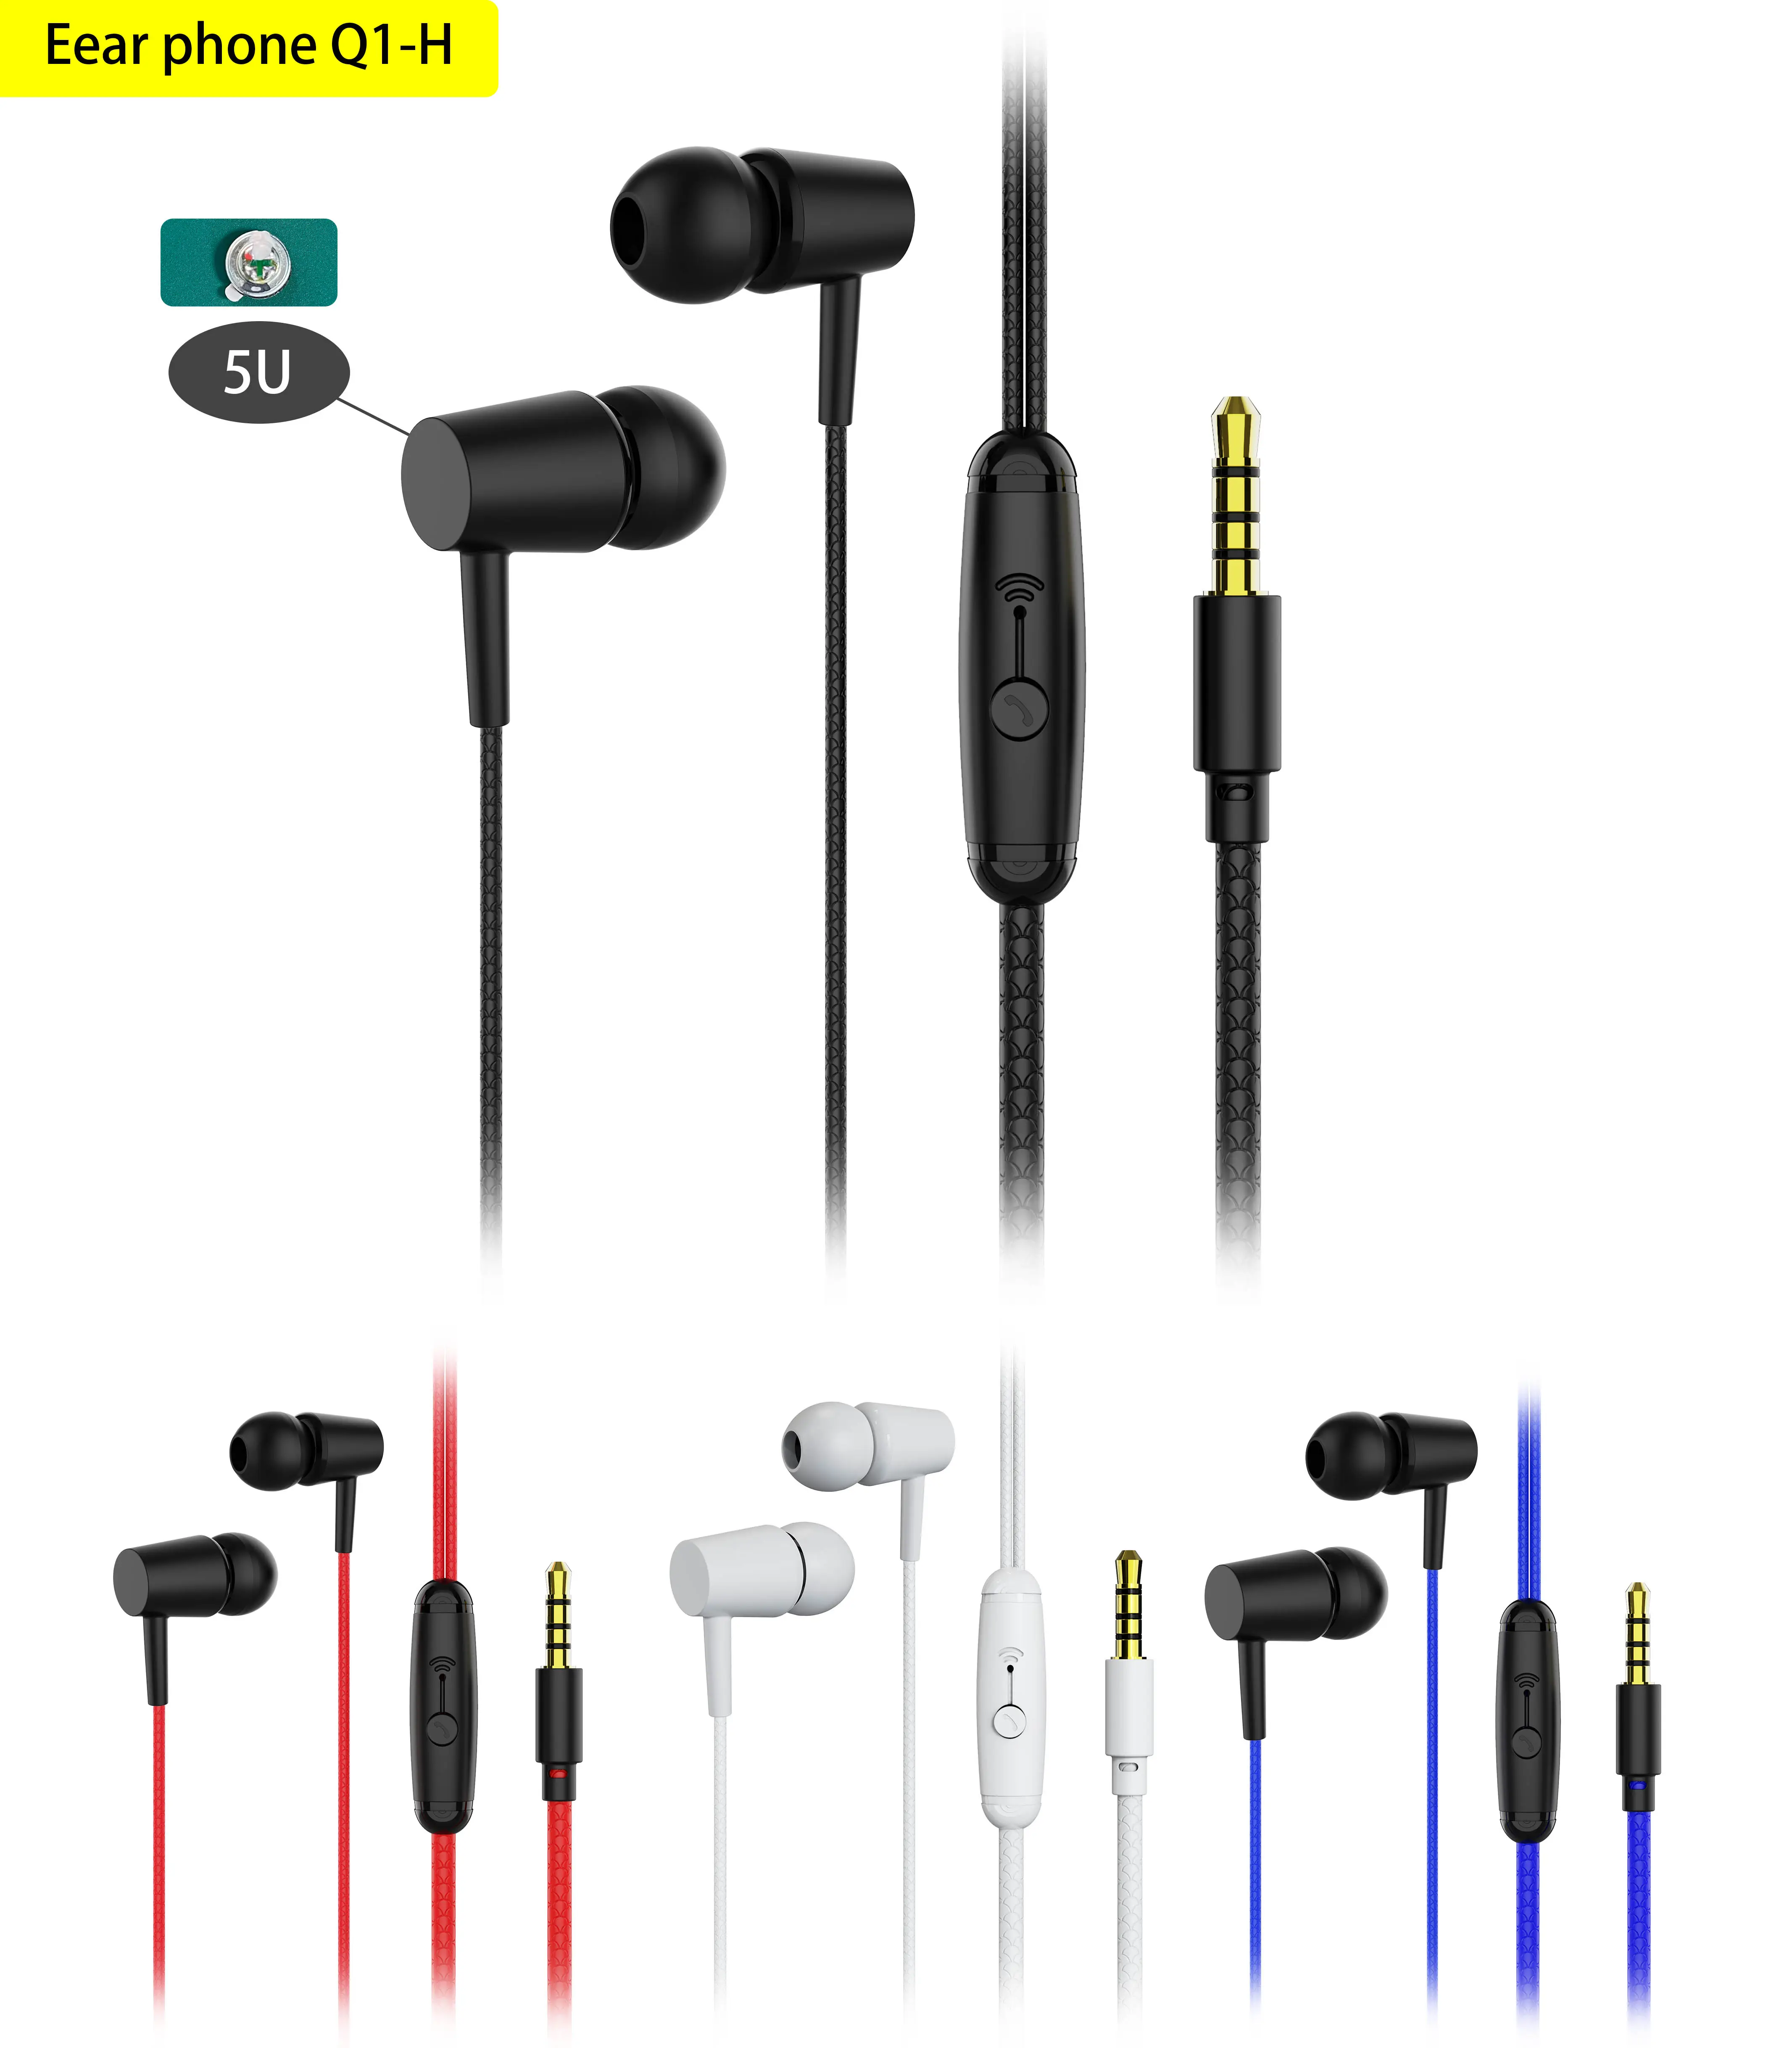 Stereo Bass In-Ear Handsfree Wired Earpiece Earphones with Mic for Iphone Samsung Nokia Xiaomi Mobile Phone